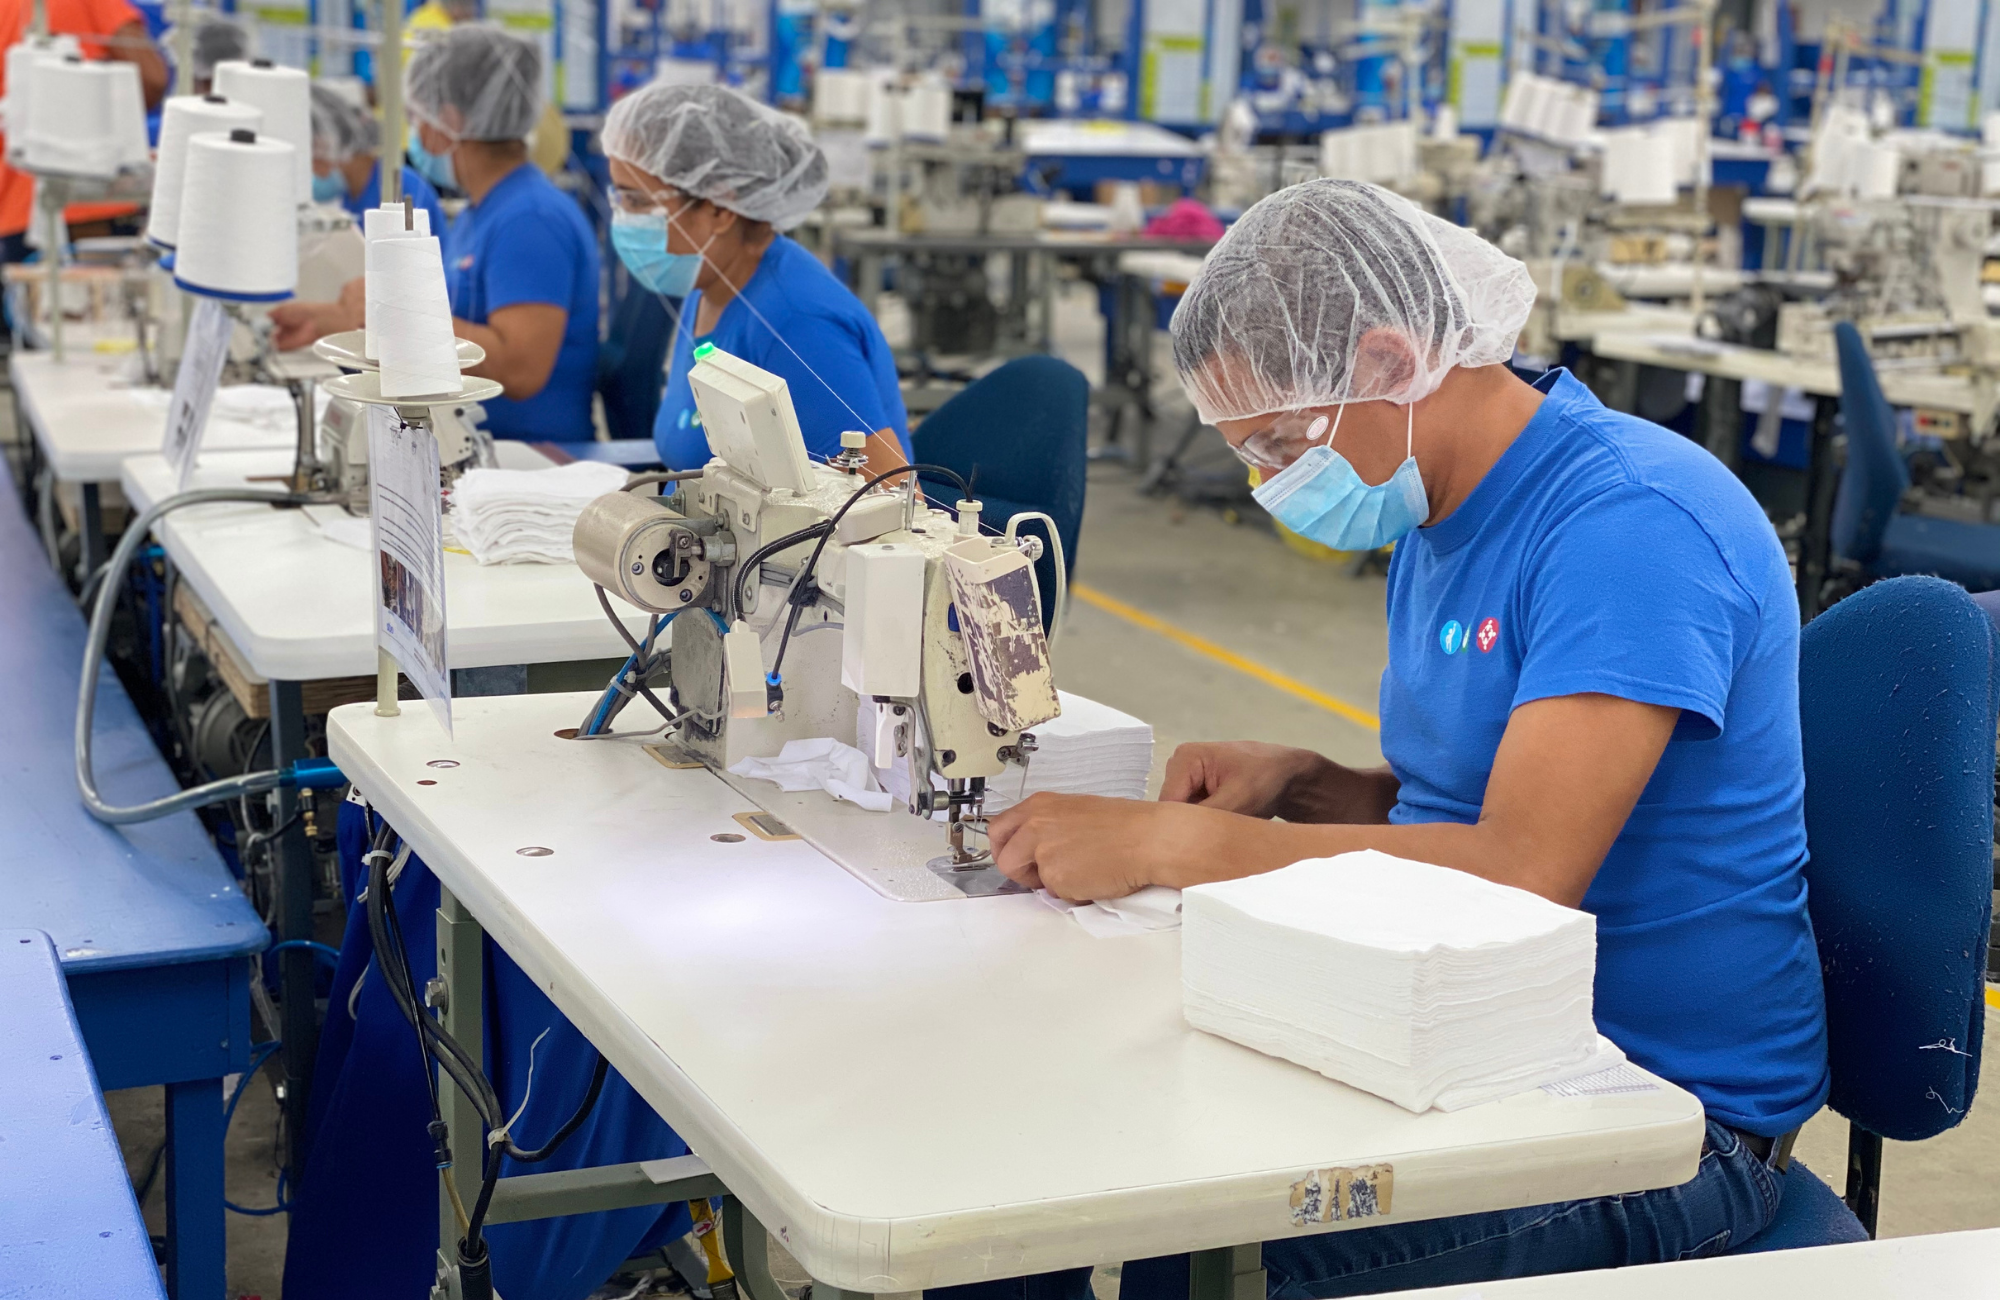 PPE-production at one of Gildan’s sewing facilities in Honduras